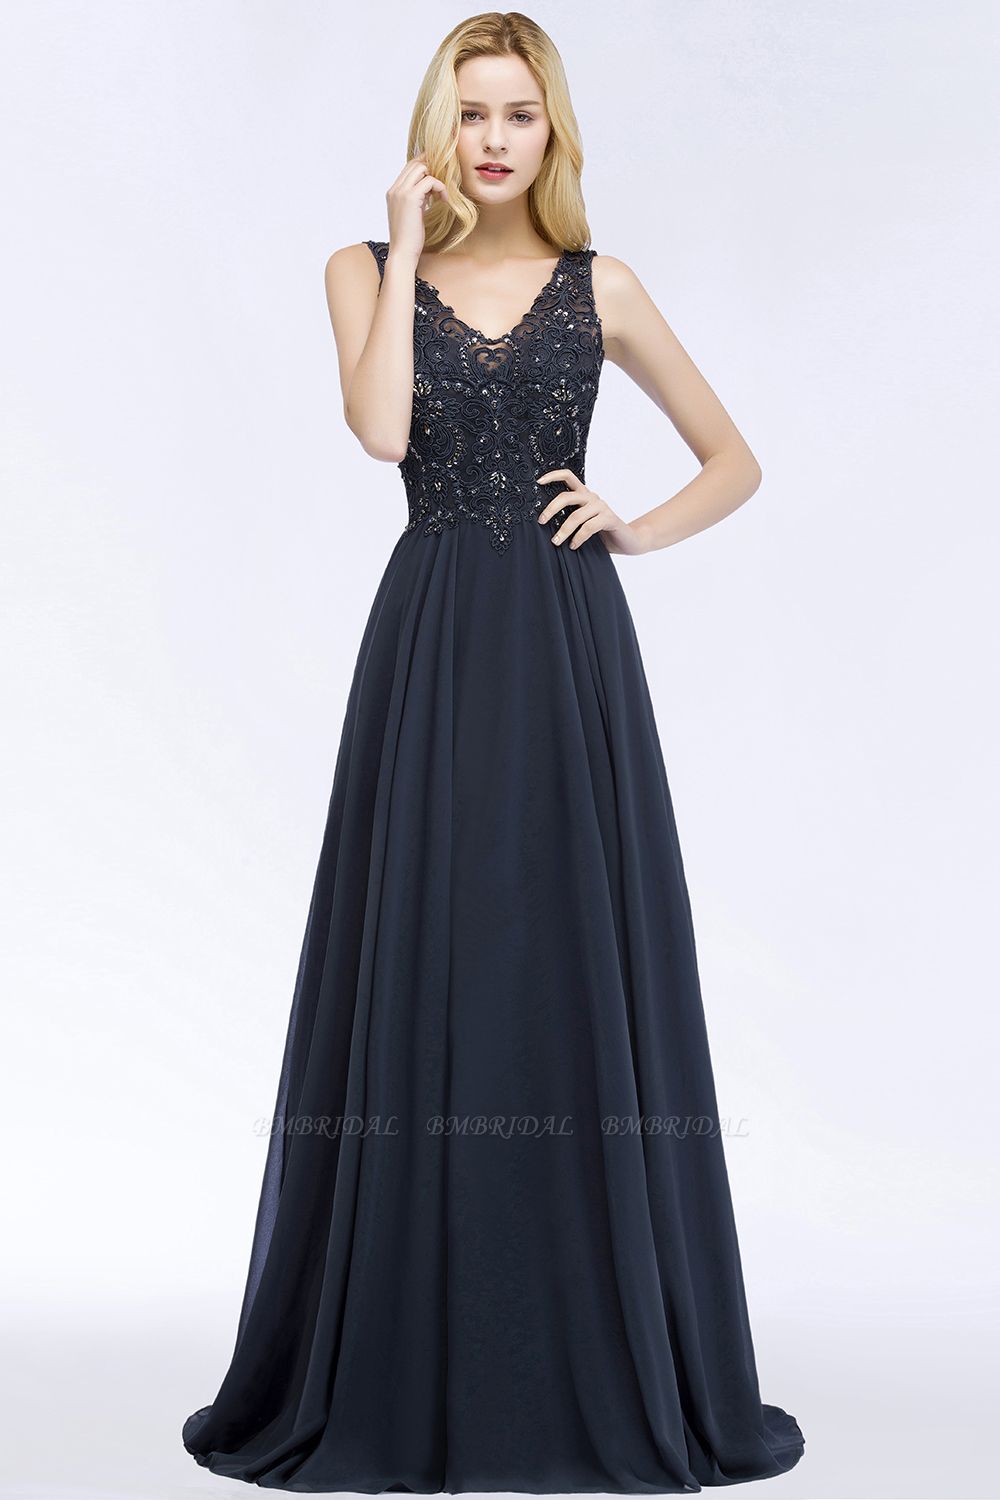 BMbridal A-line V-neck Sleeveless Long Appliqued Chiffon Prom Dress with Crystals